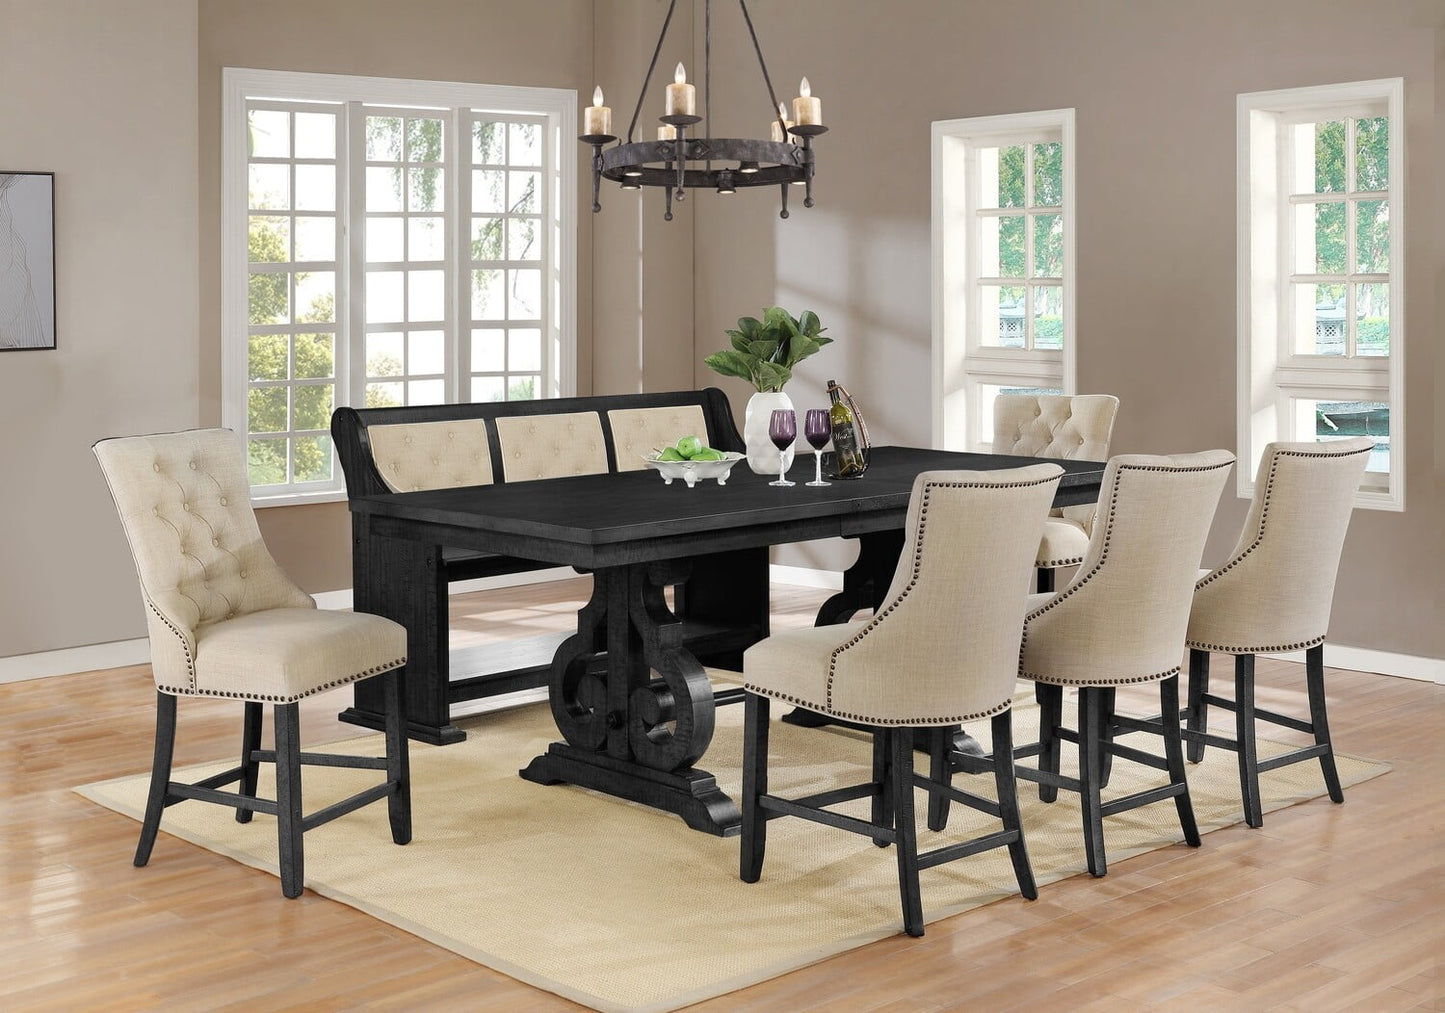 Hacienda 7 Pc Dining Collection - Beige or Gray Seating